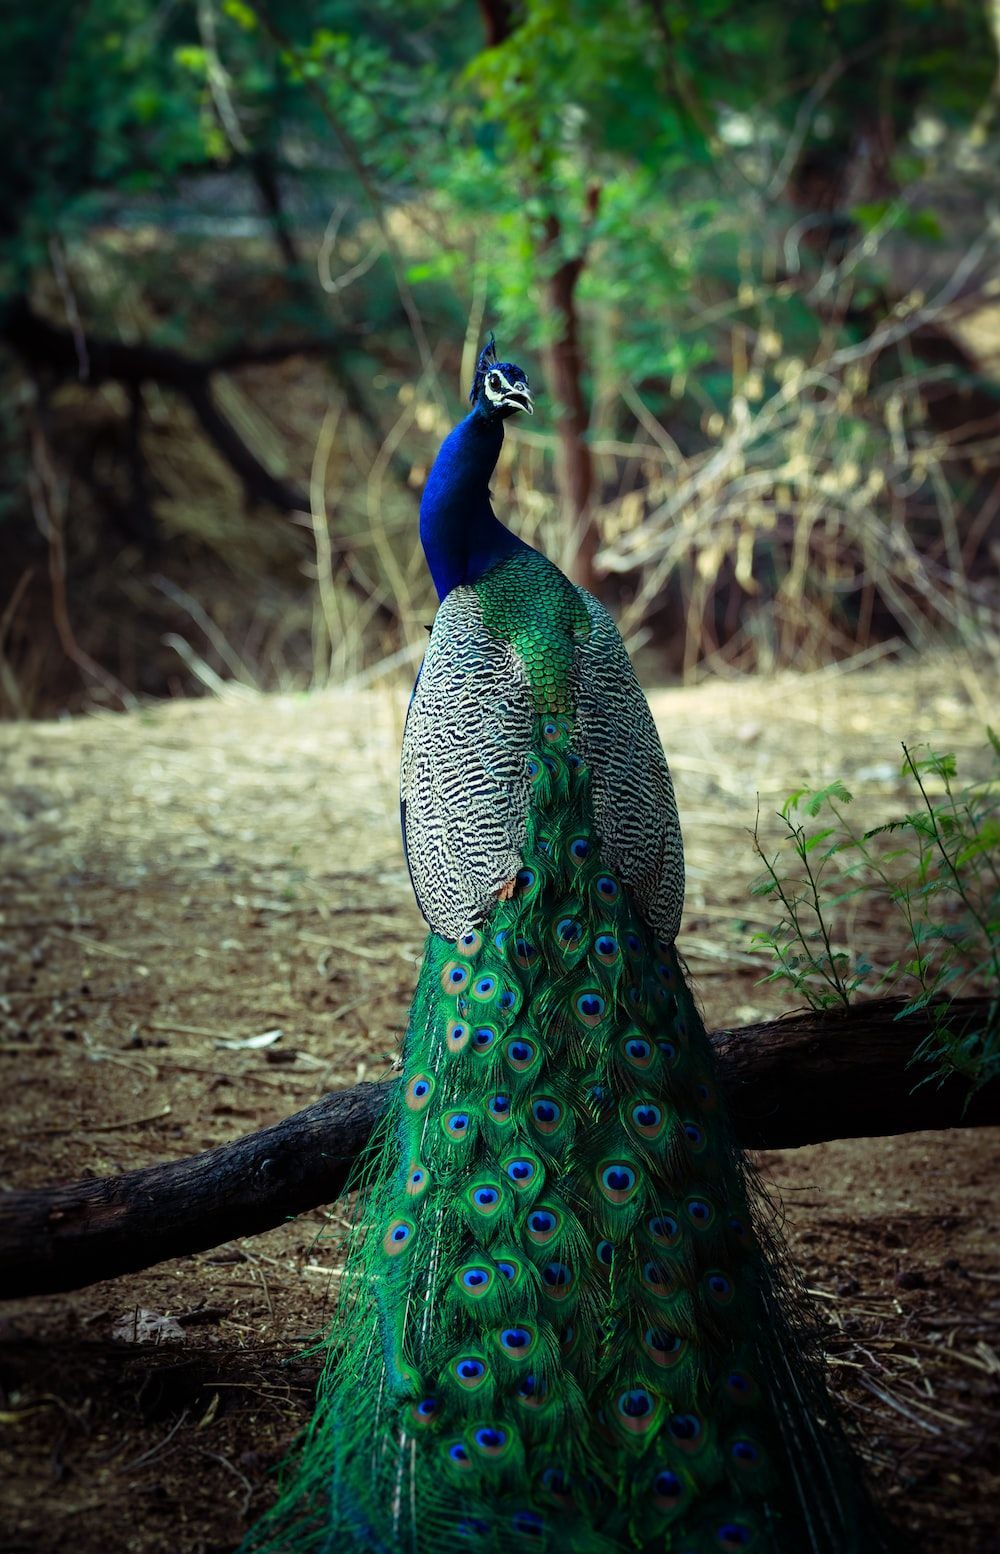 White Peacock Picture. Download Free Image